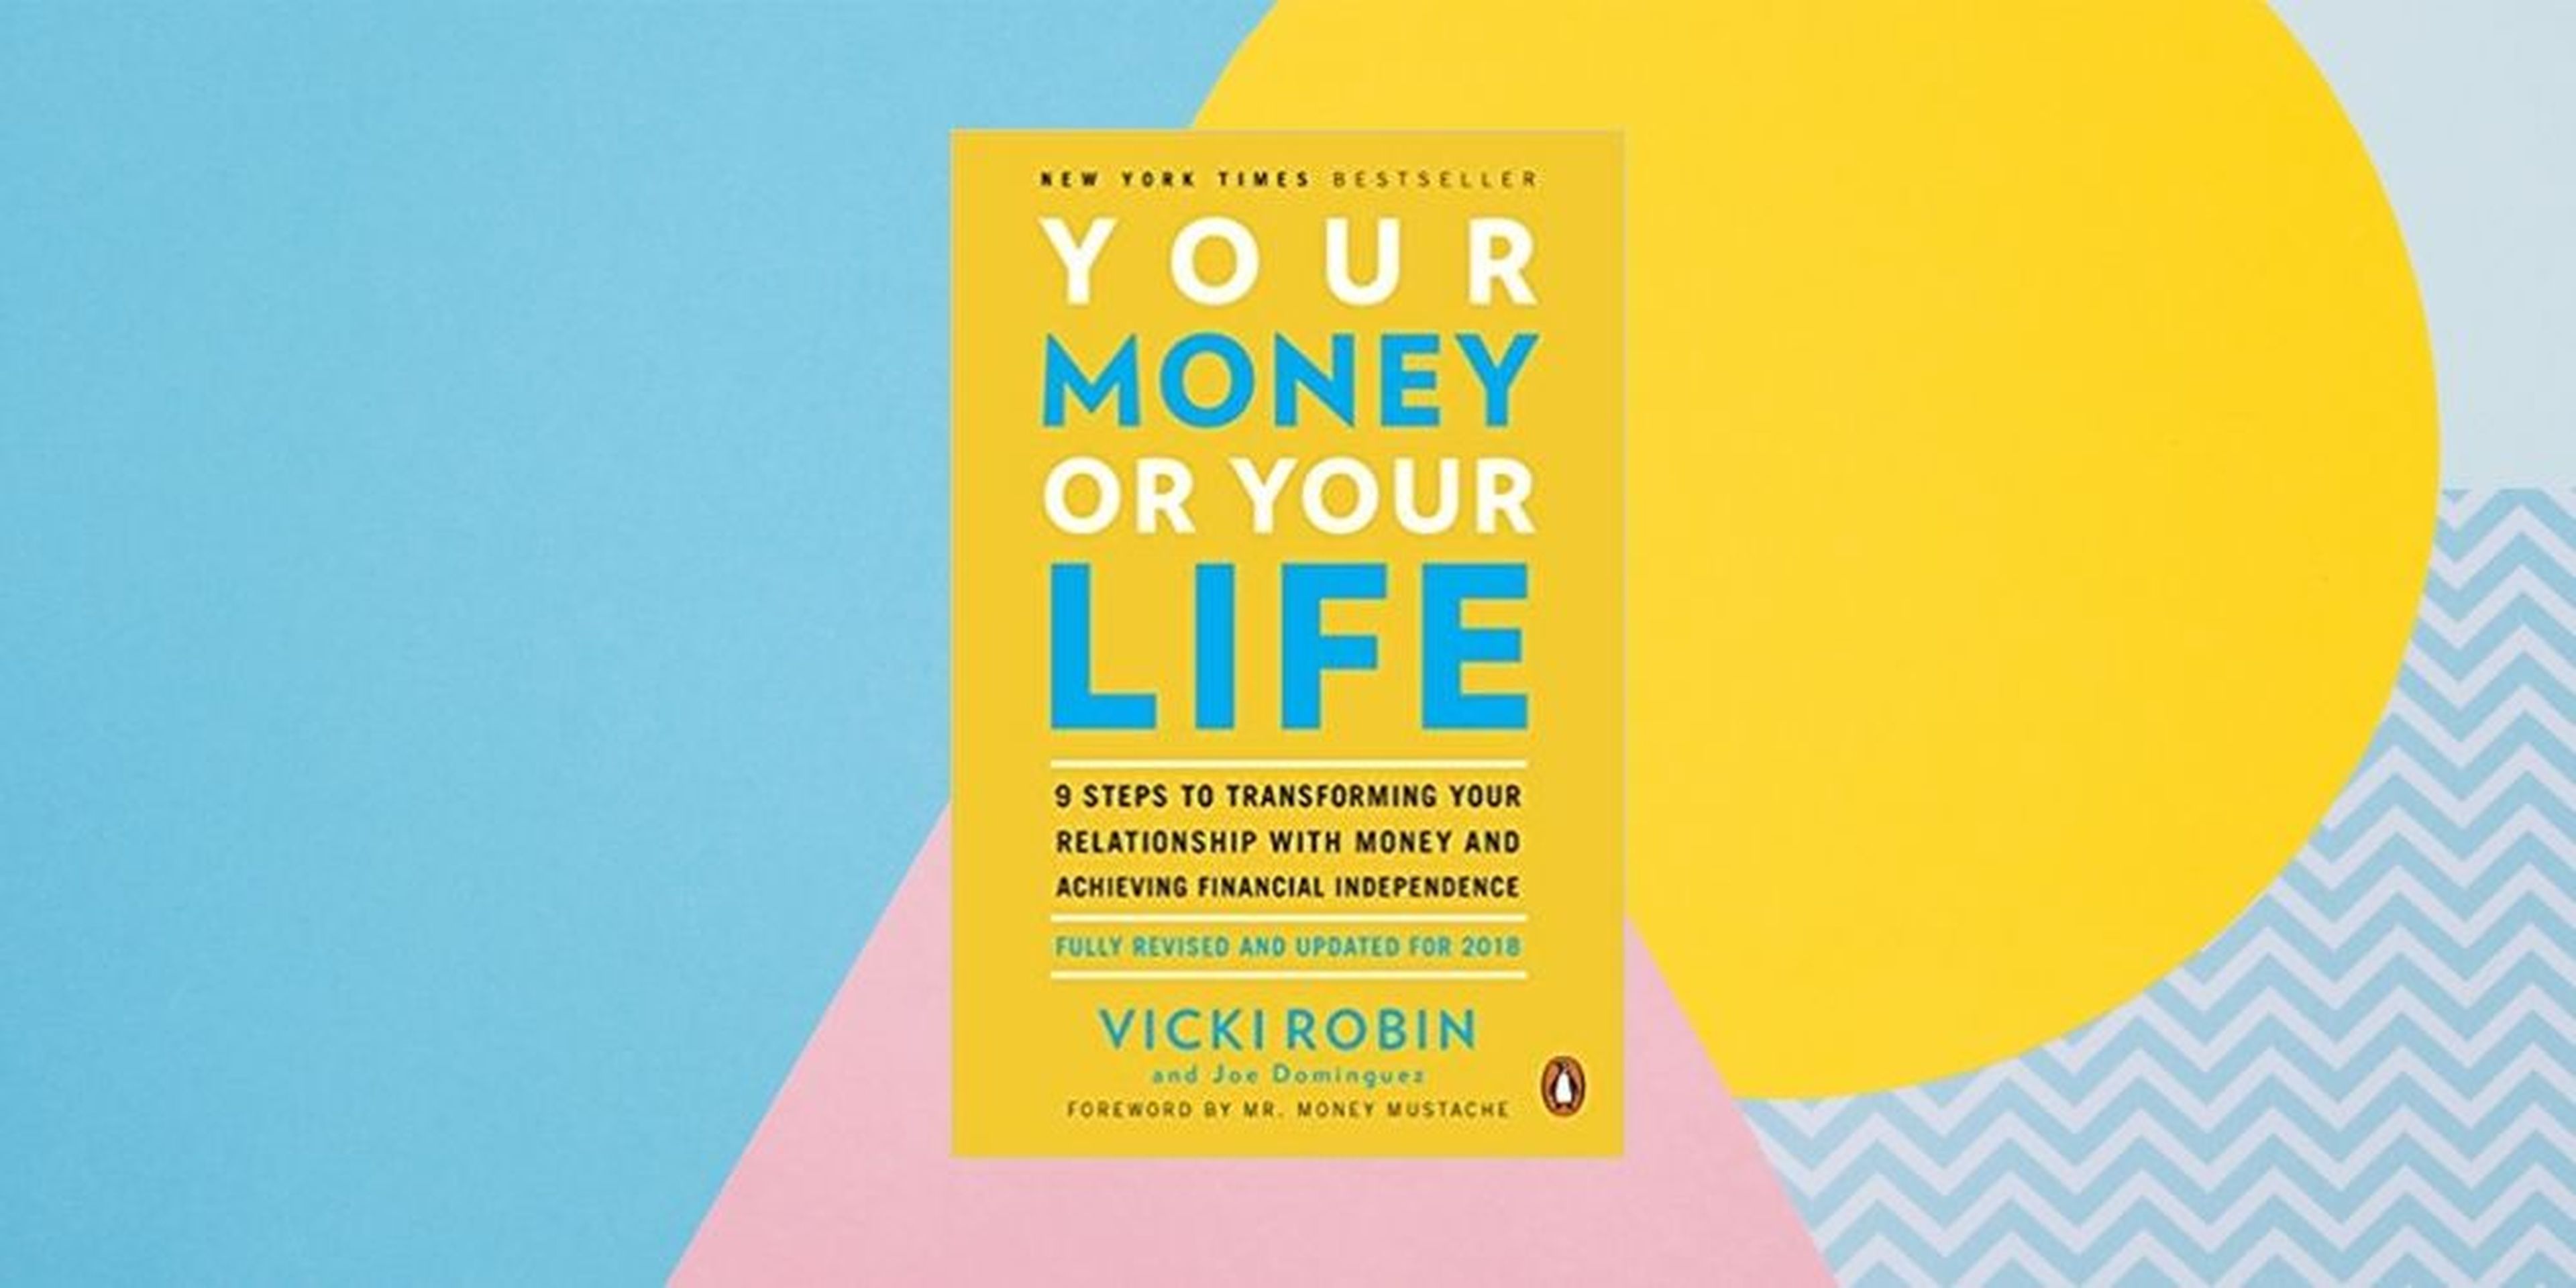 “Your Money or Your Life: 9 Steps to Transforming Your Relationship With Money and Achieving Financial Independence”